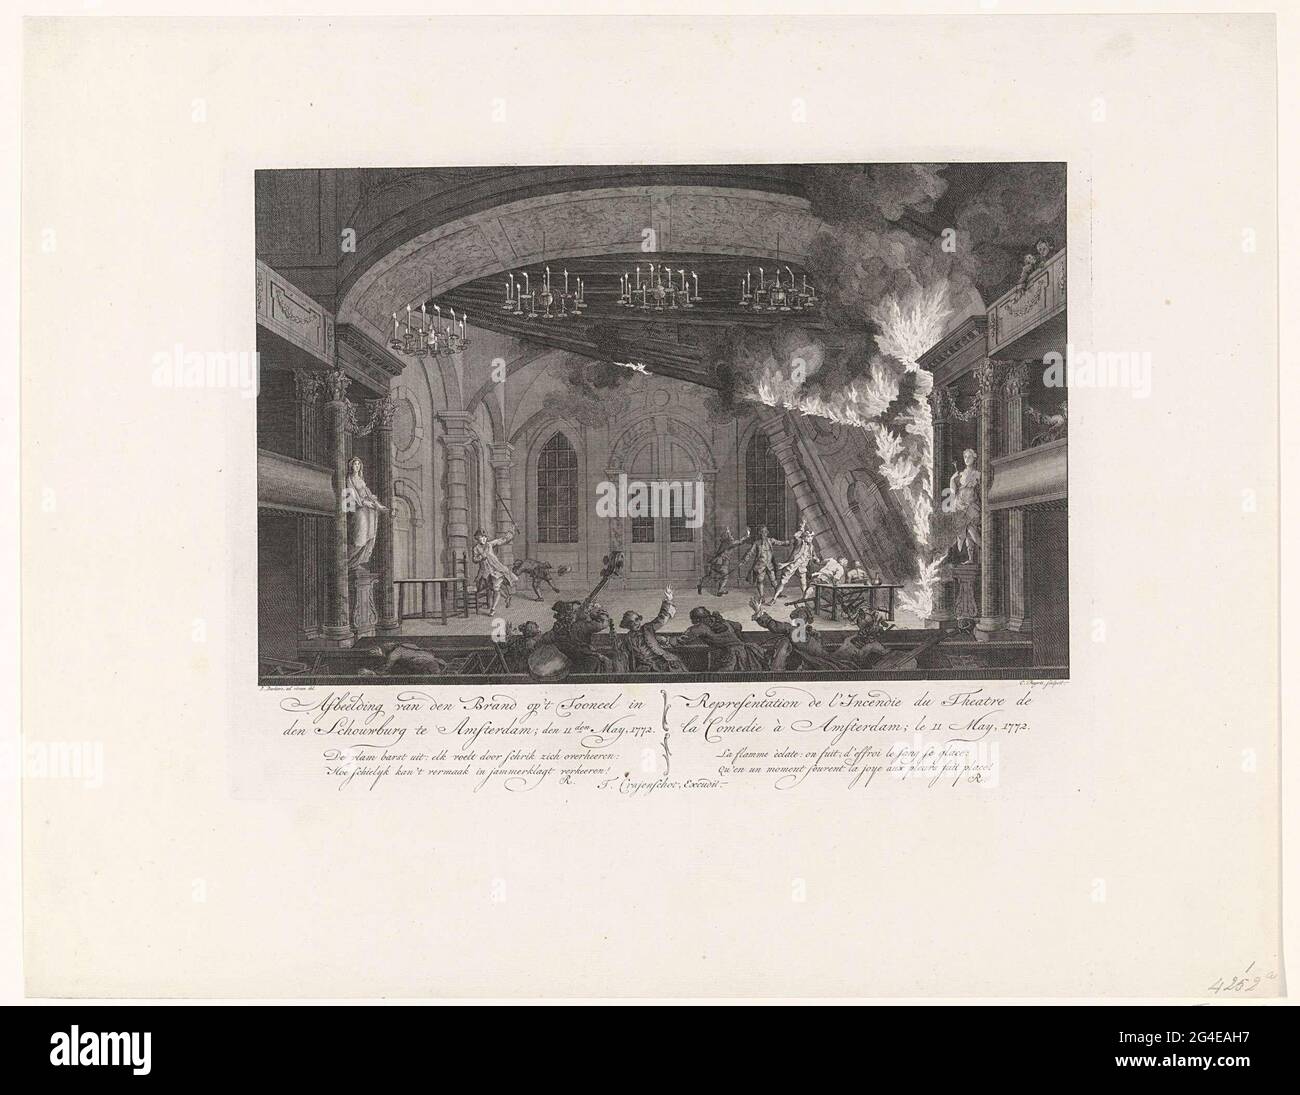 . View of the stage of the Amsterdamse Schouwburg during the outbreak of the fire on May 11, 1772. The fire started during the execution of the opera 'the desertor'. On the stage flights actors and right falls a burning decor piece. Musicians flee the orchestra bin in the foreground. Under the show the title and a two-legged fresh in Dutch (left) and French (right). Part of a series of four prints with title print over the fire in the Amsterdamse Schouwburg. Stock Photo